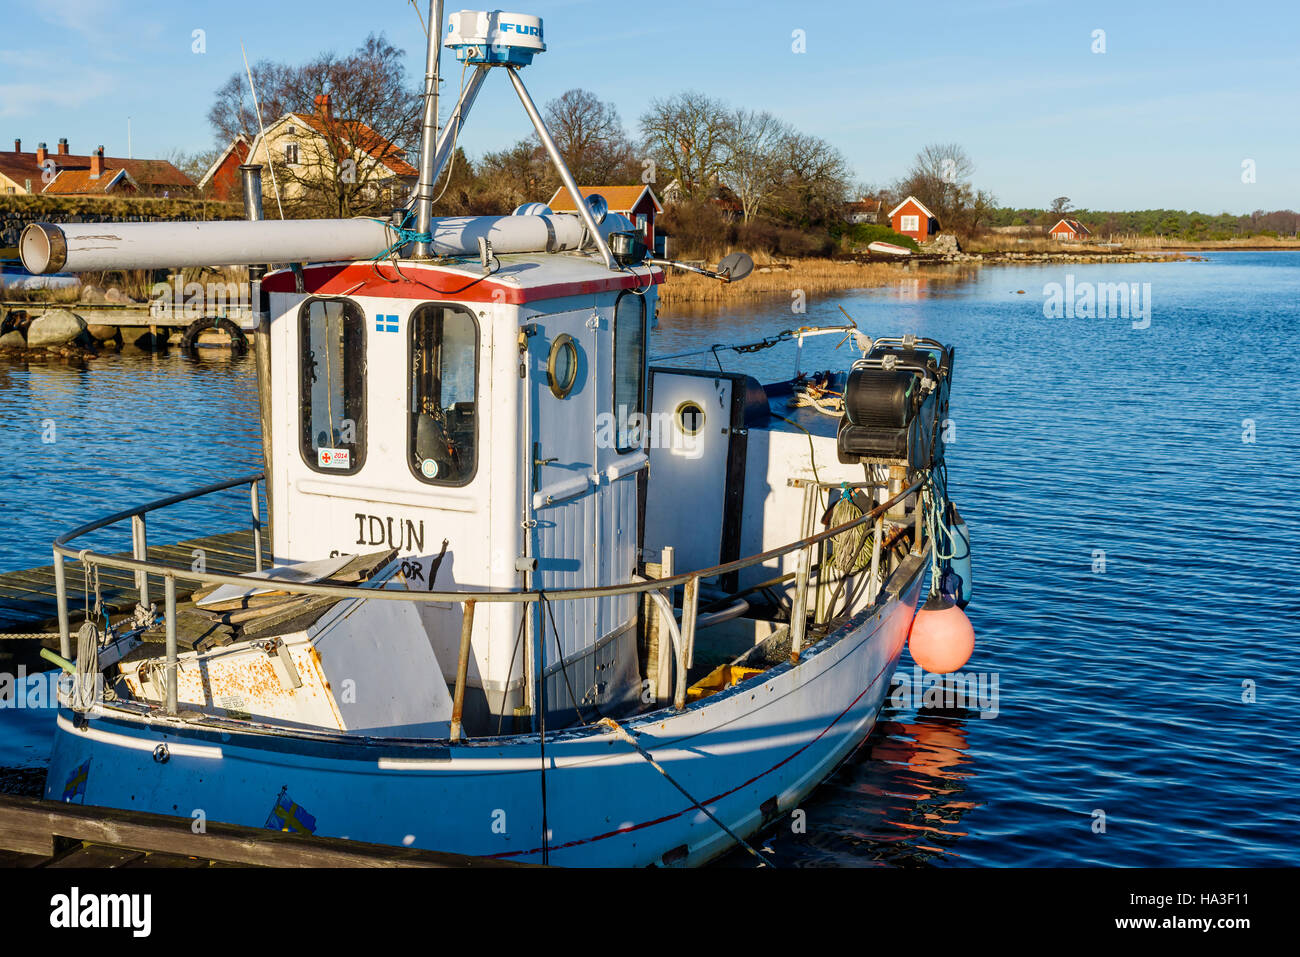 Kristianopel, Sweden - November 24, 2016: Travel documentary of Kristianopel in fall. Small fishing boat in harbor with homes and sheds in background. Stock Photo